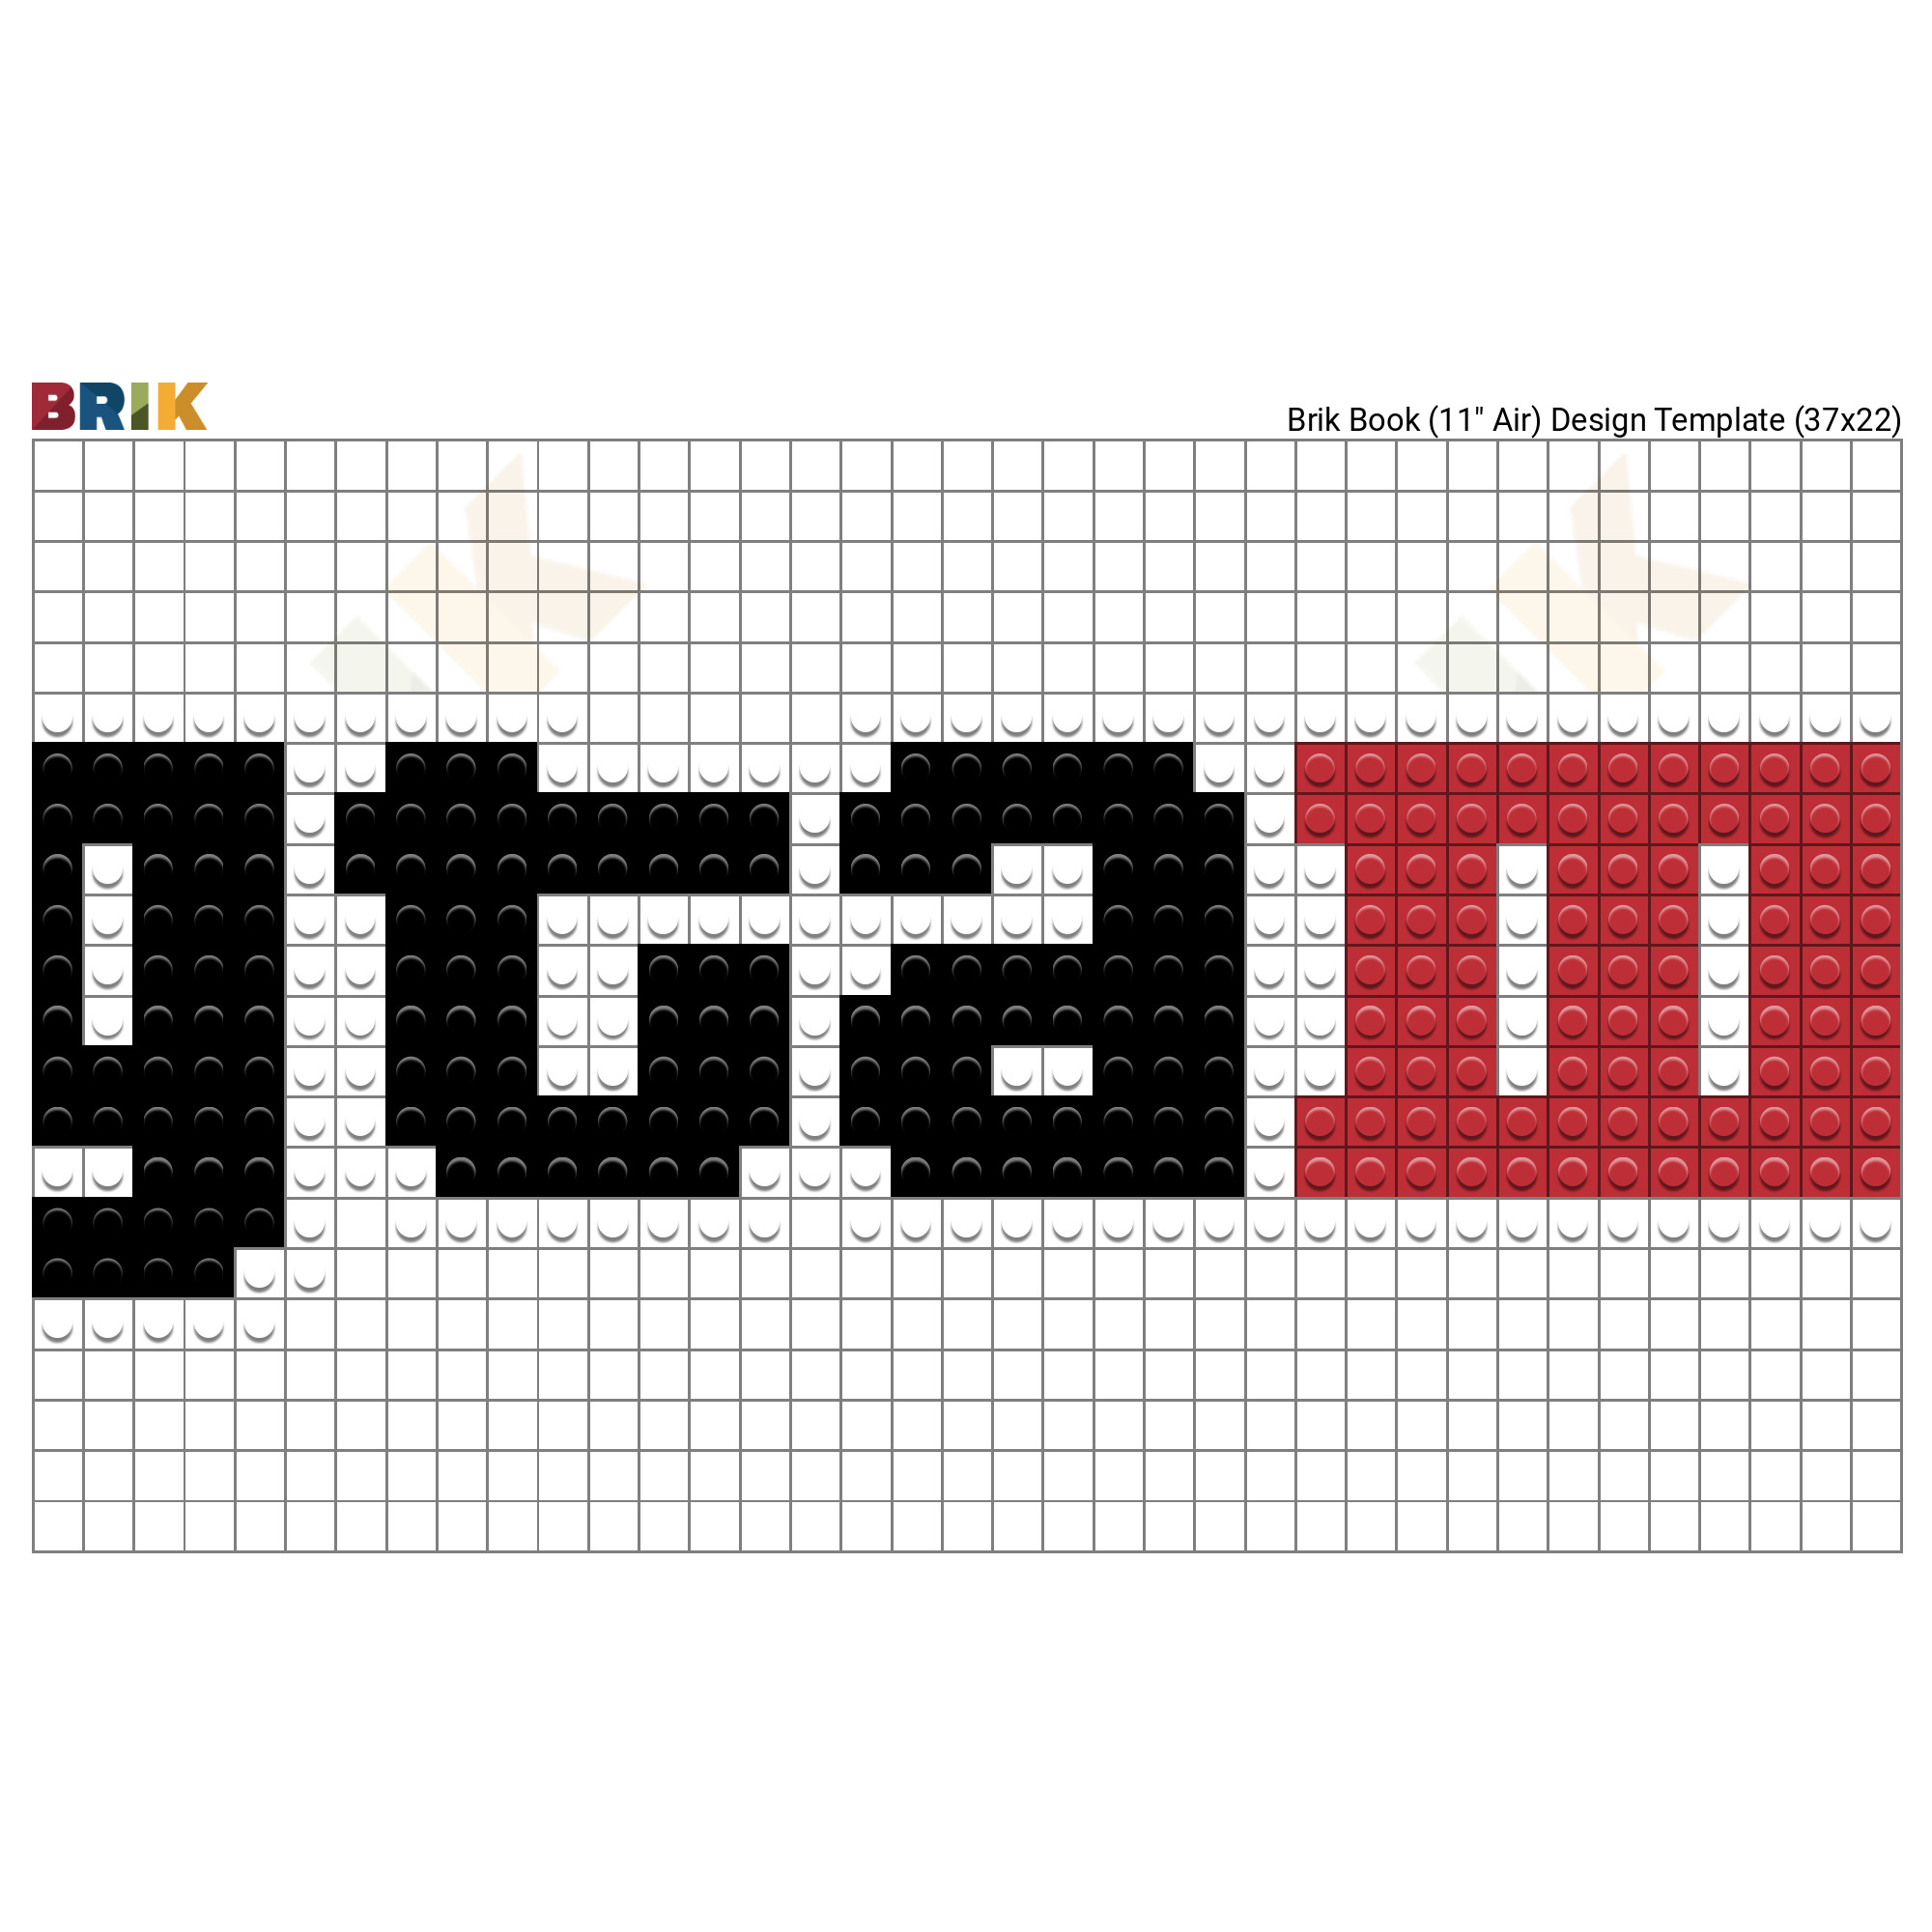 Pixilart - Y8 games logo by FAMICON-ROB